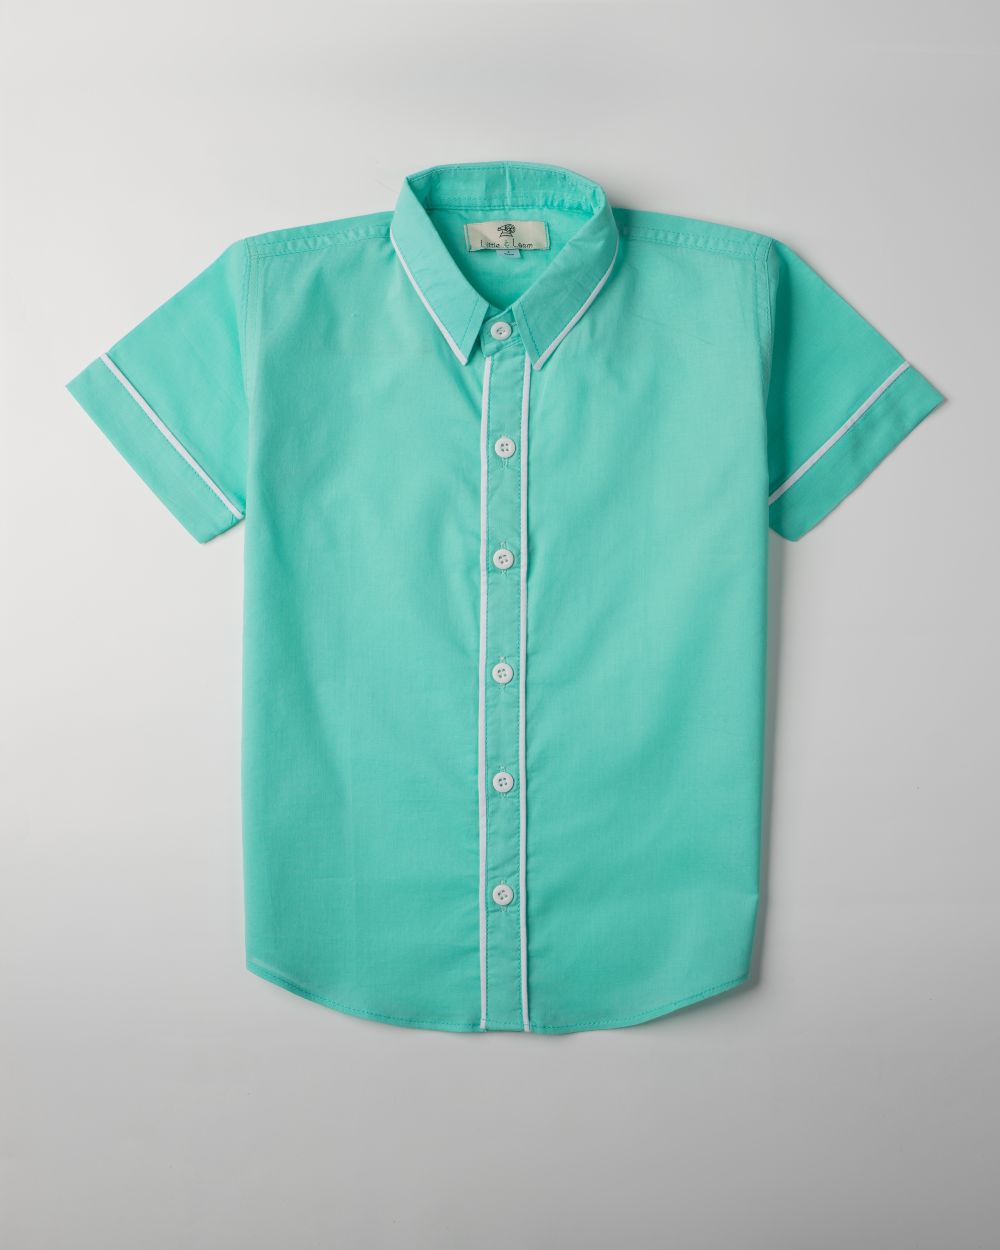 TIFFANY SHIRT WITH WHITE PIPPING